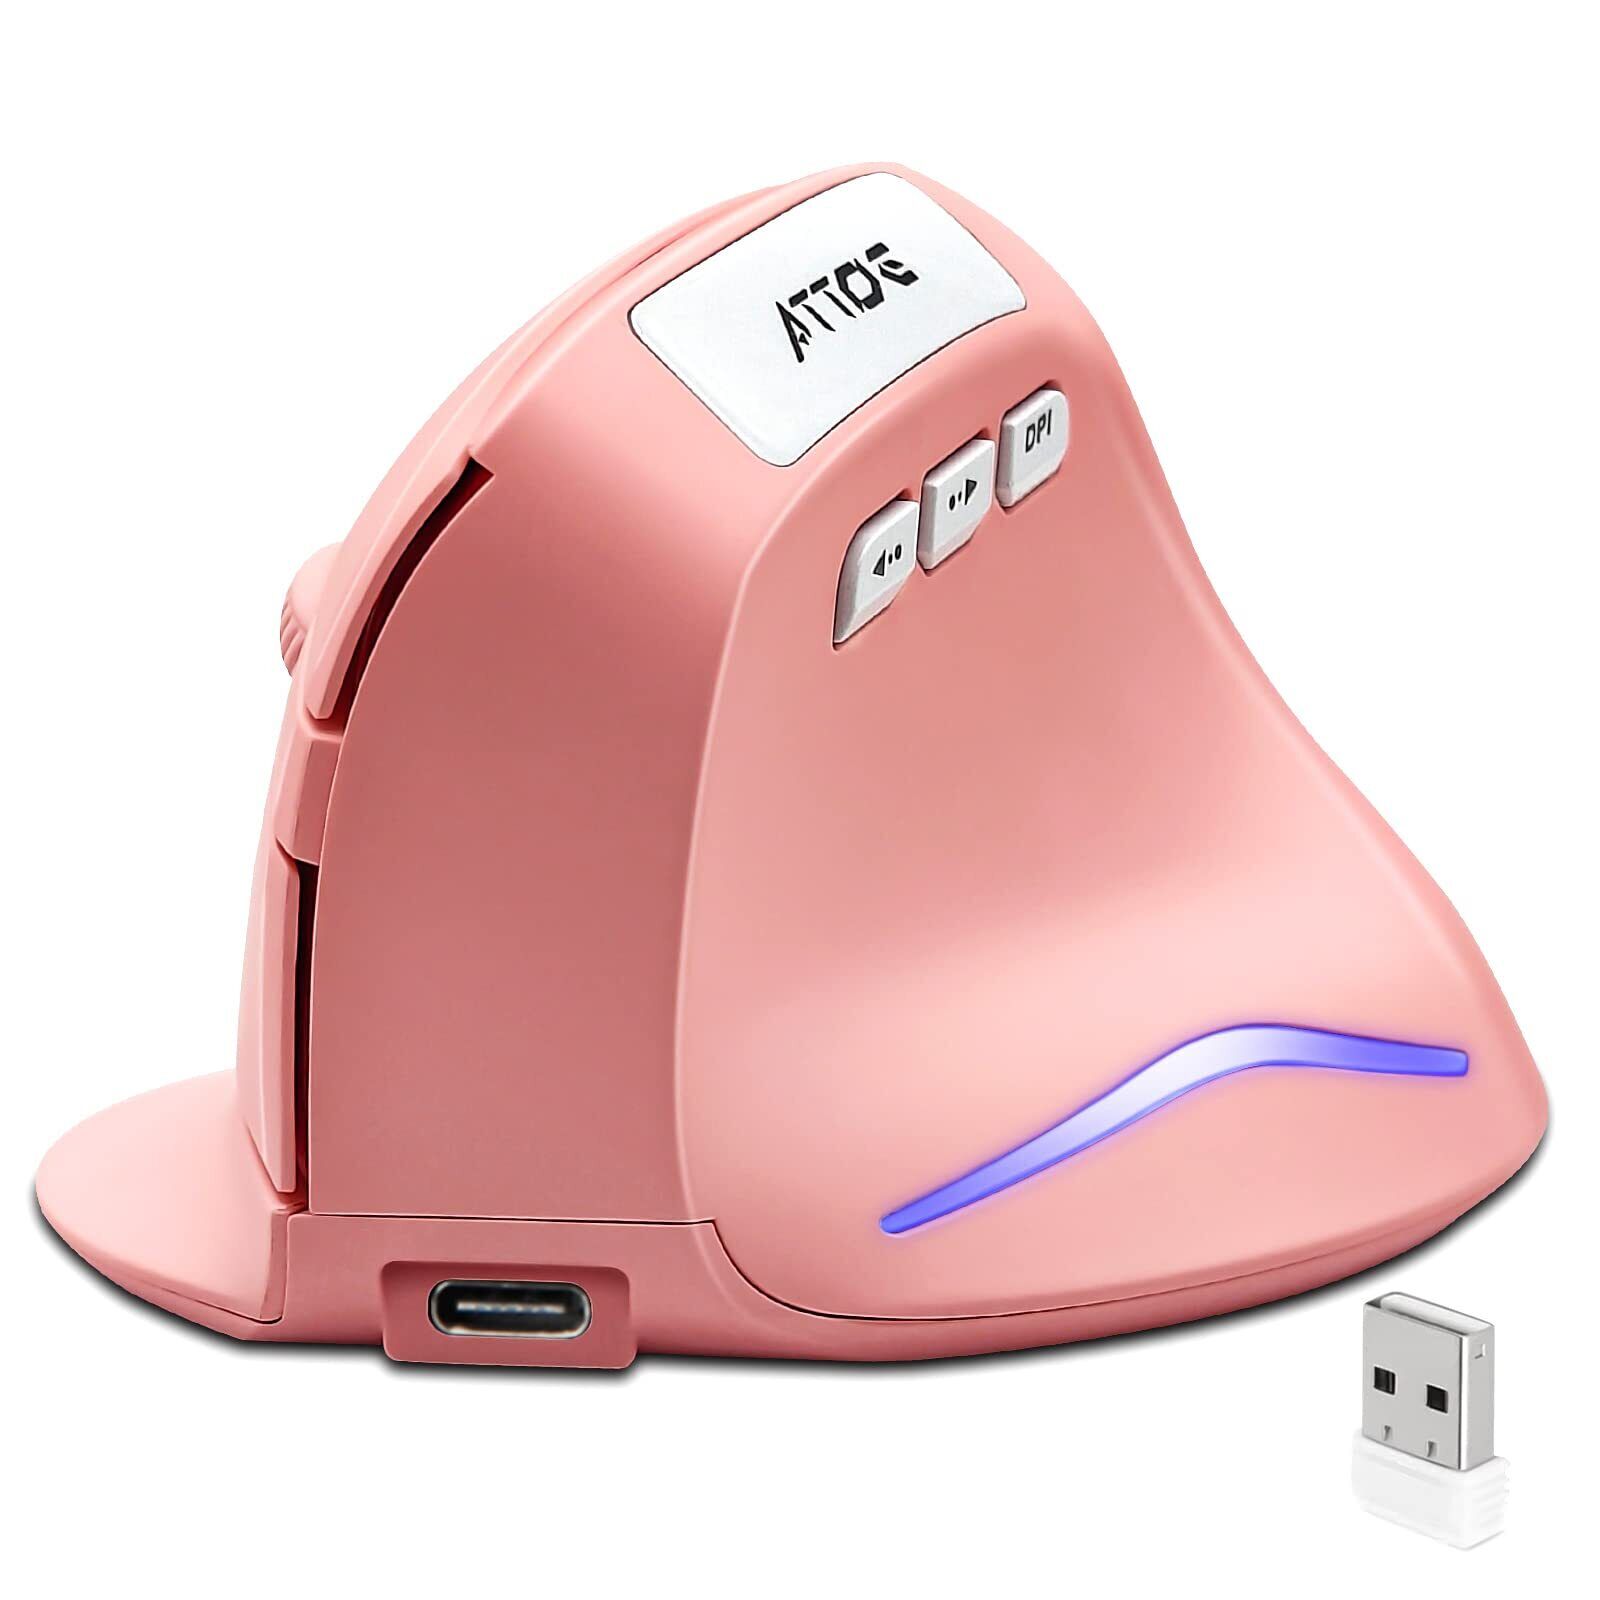 Ergonomic Mouse,2.4G Wireless Vertical Mouse Pink Computer Mouse with 3 Adjus...